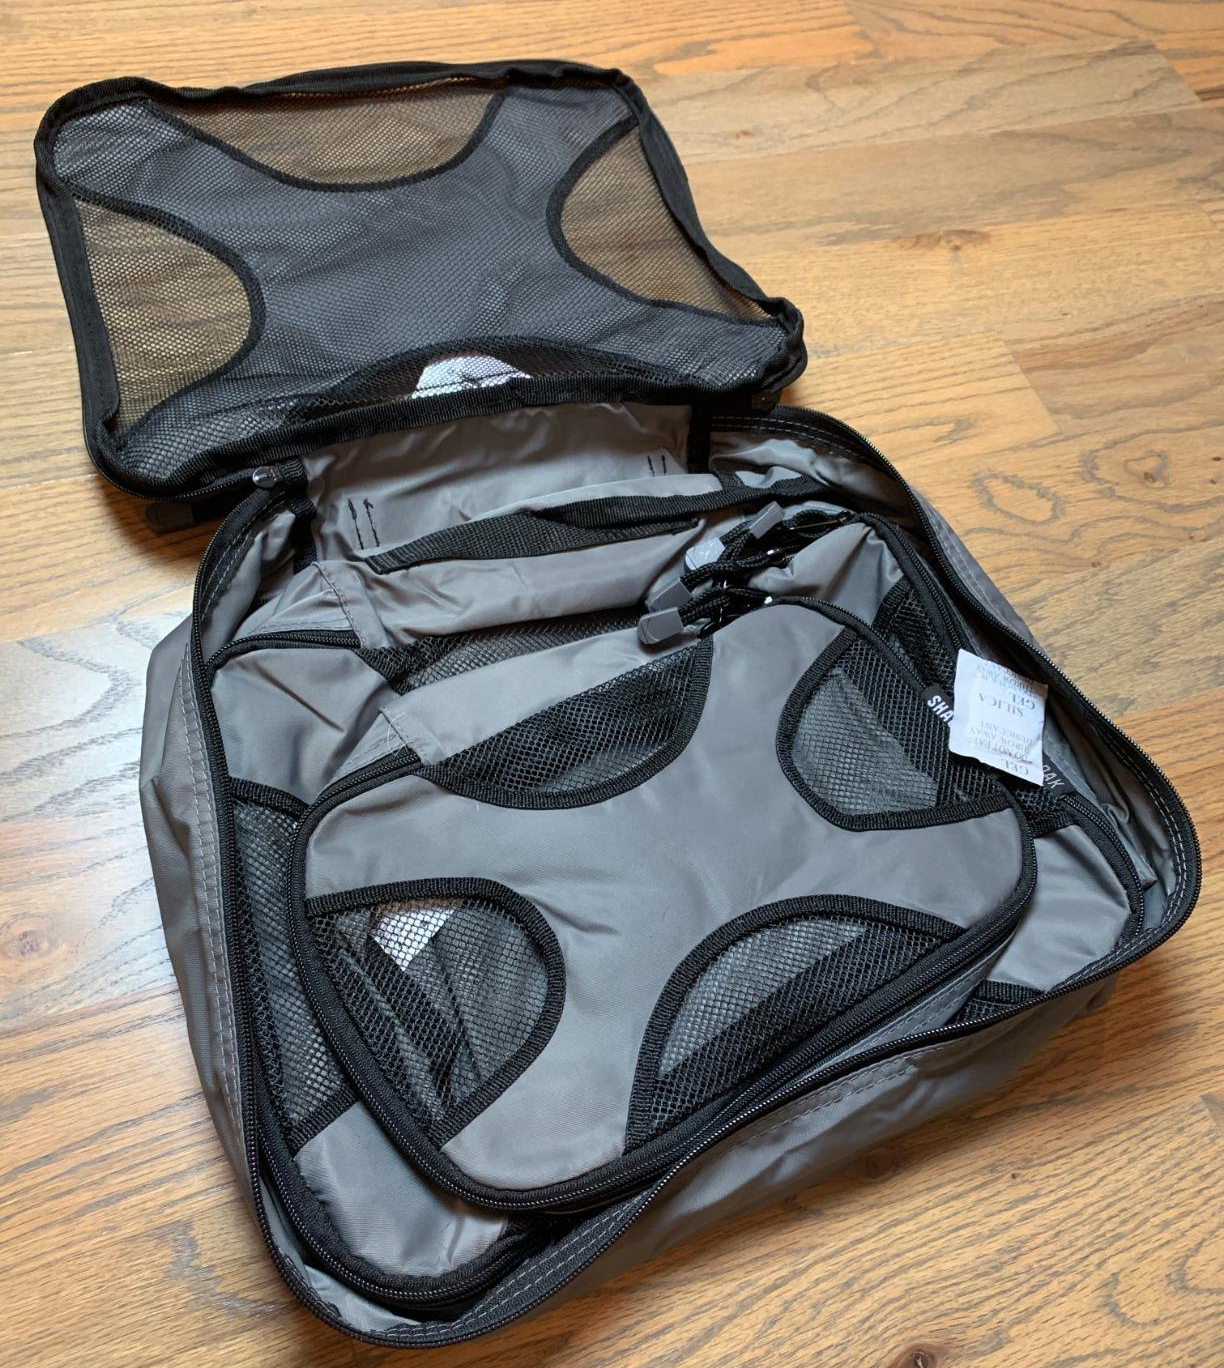 Lindsay Albanese Weekender Two-Sided Laundry Bag: Clean & Dirty Separation When Traveling